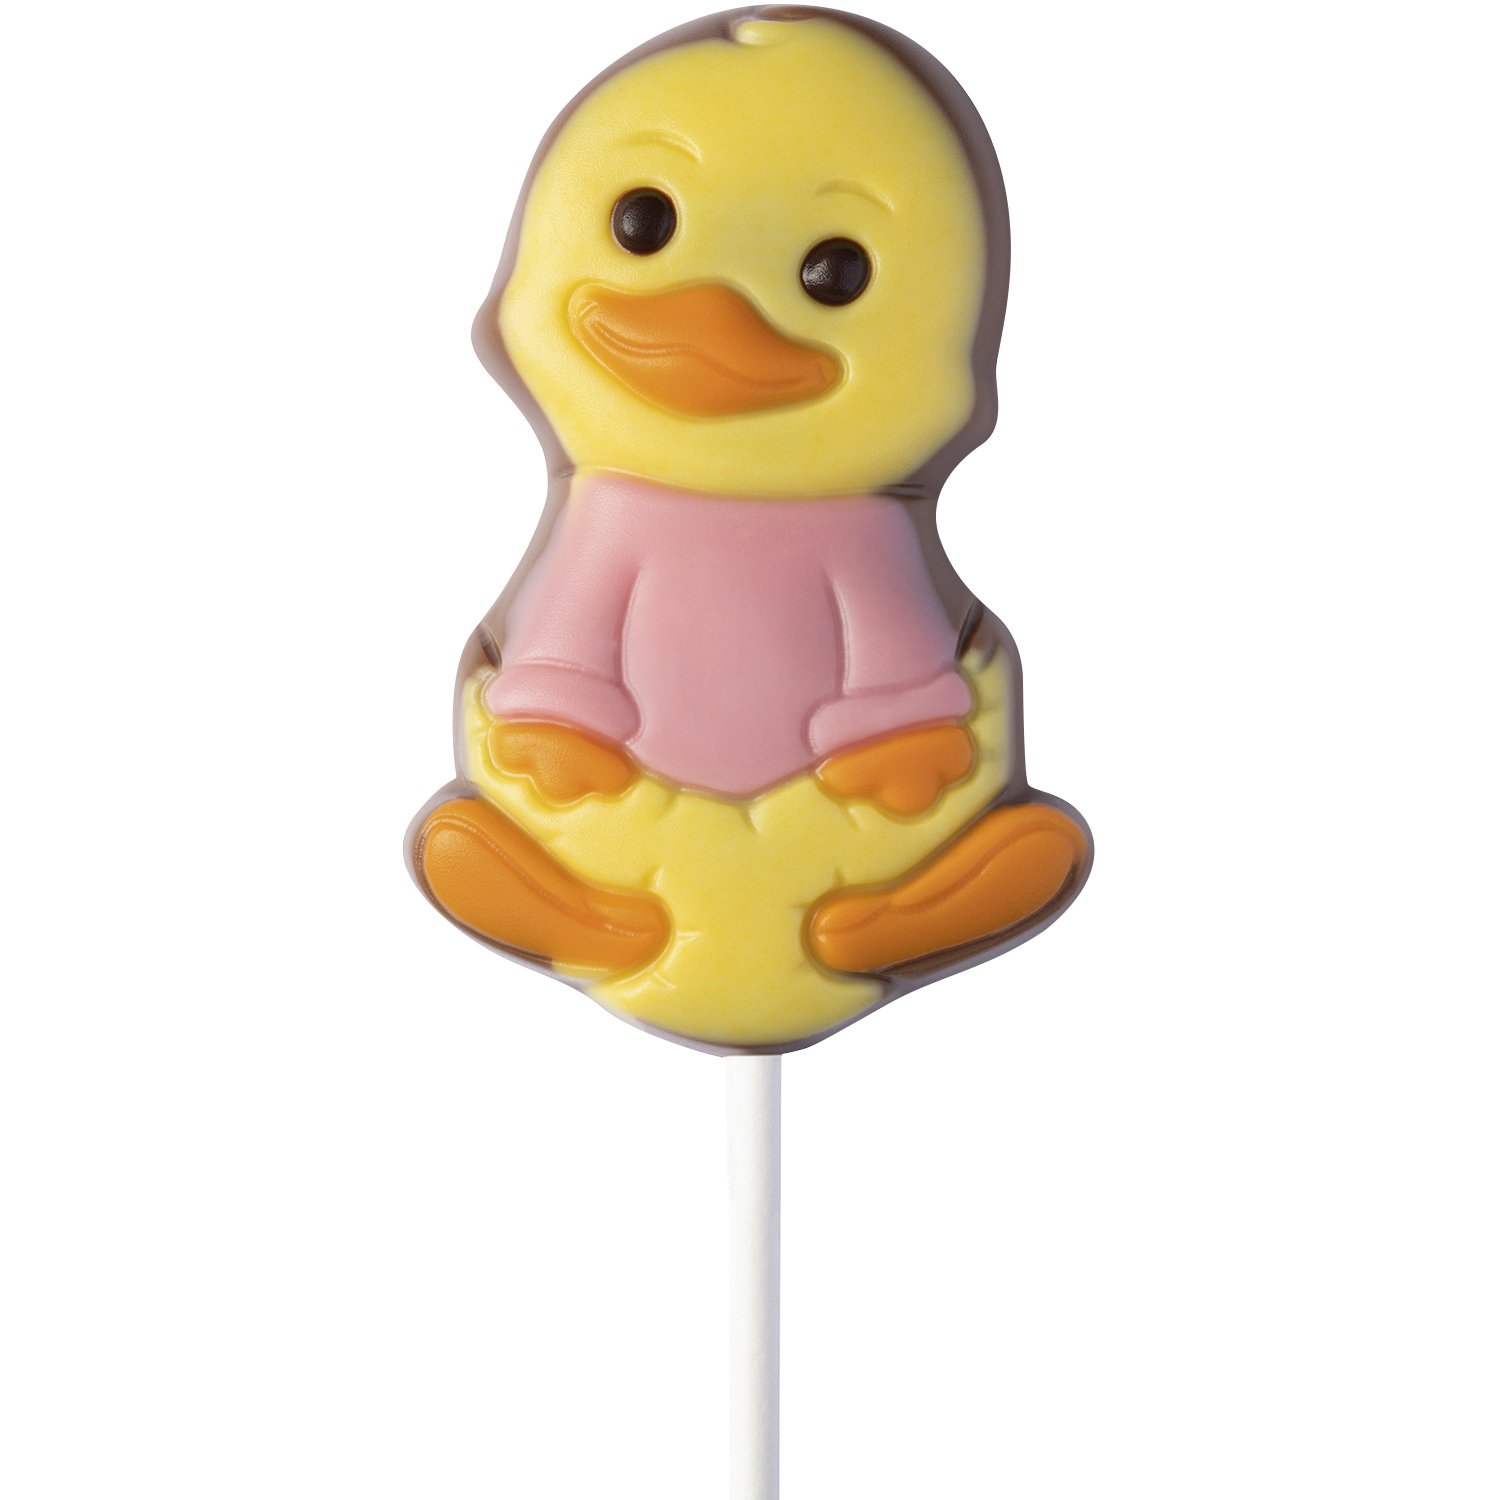 Decorated milk choc duckling lollies in display stand - 2 colours - 164mm - 18x35g